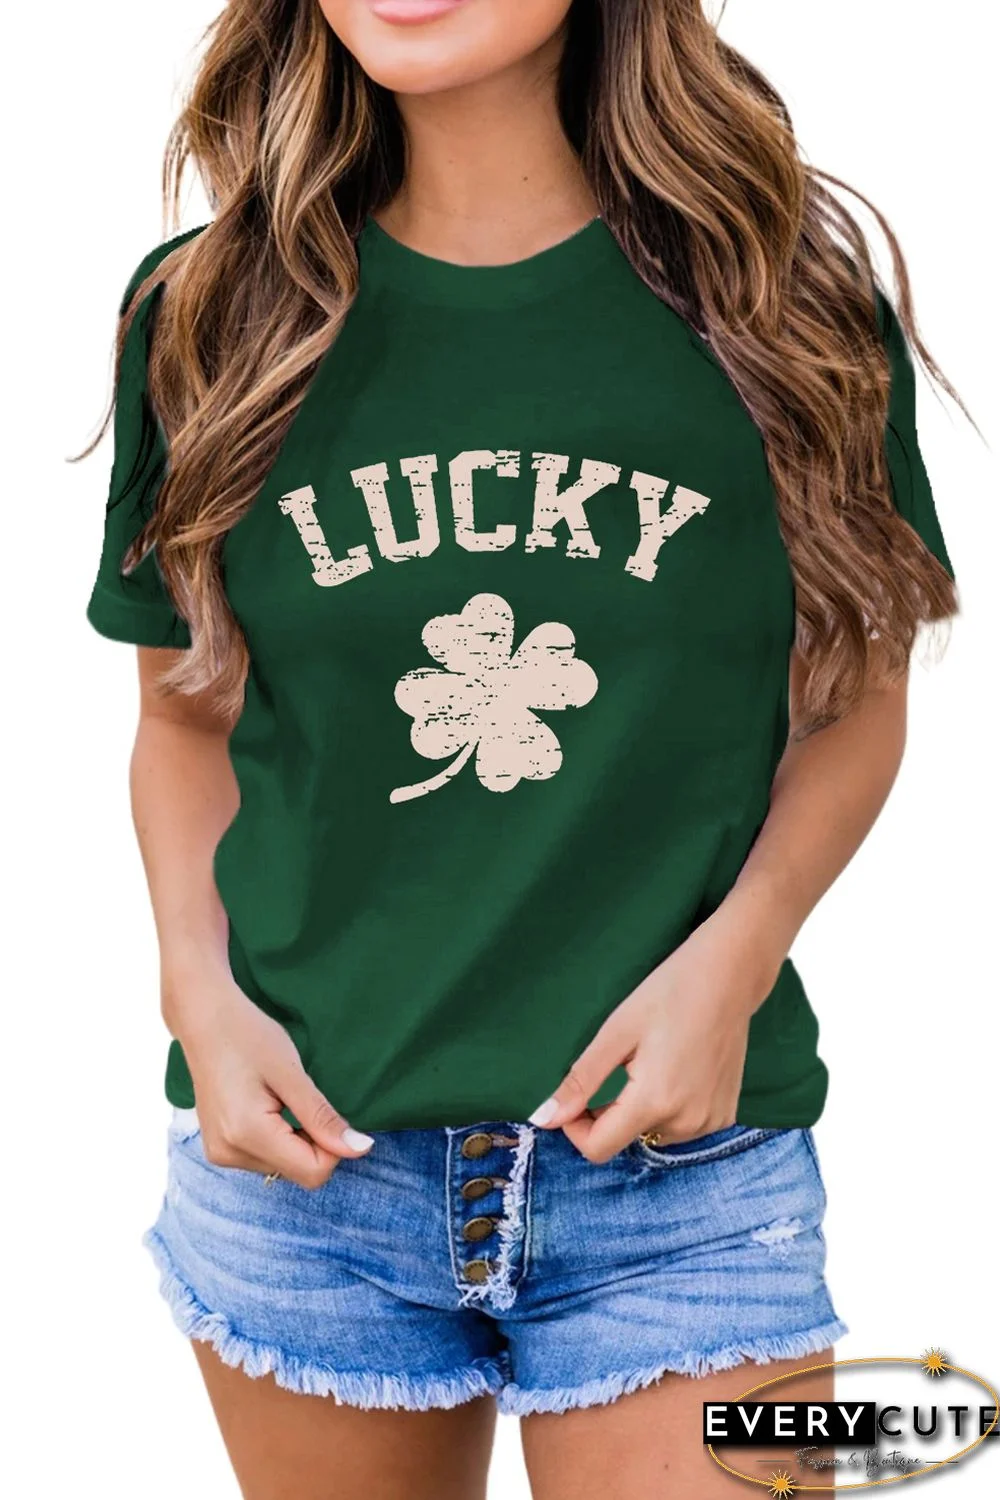 Green St. Patrick's Day LUCKY Clover Print Graphic T-shirt